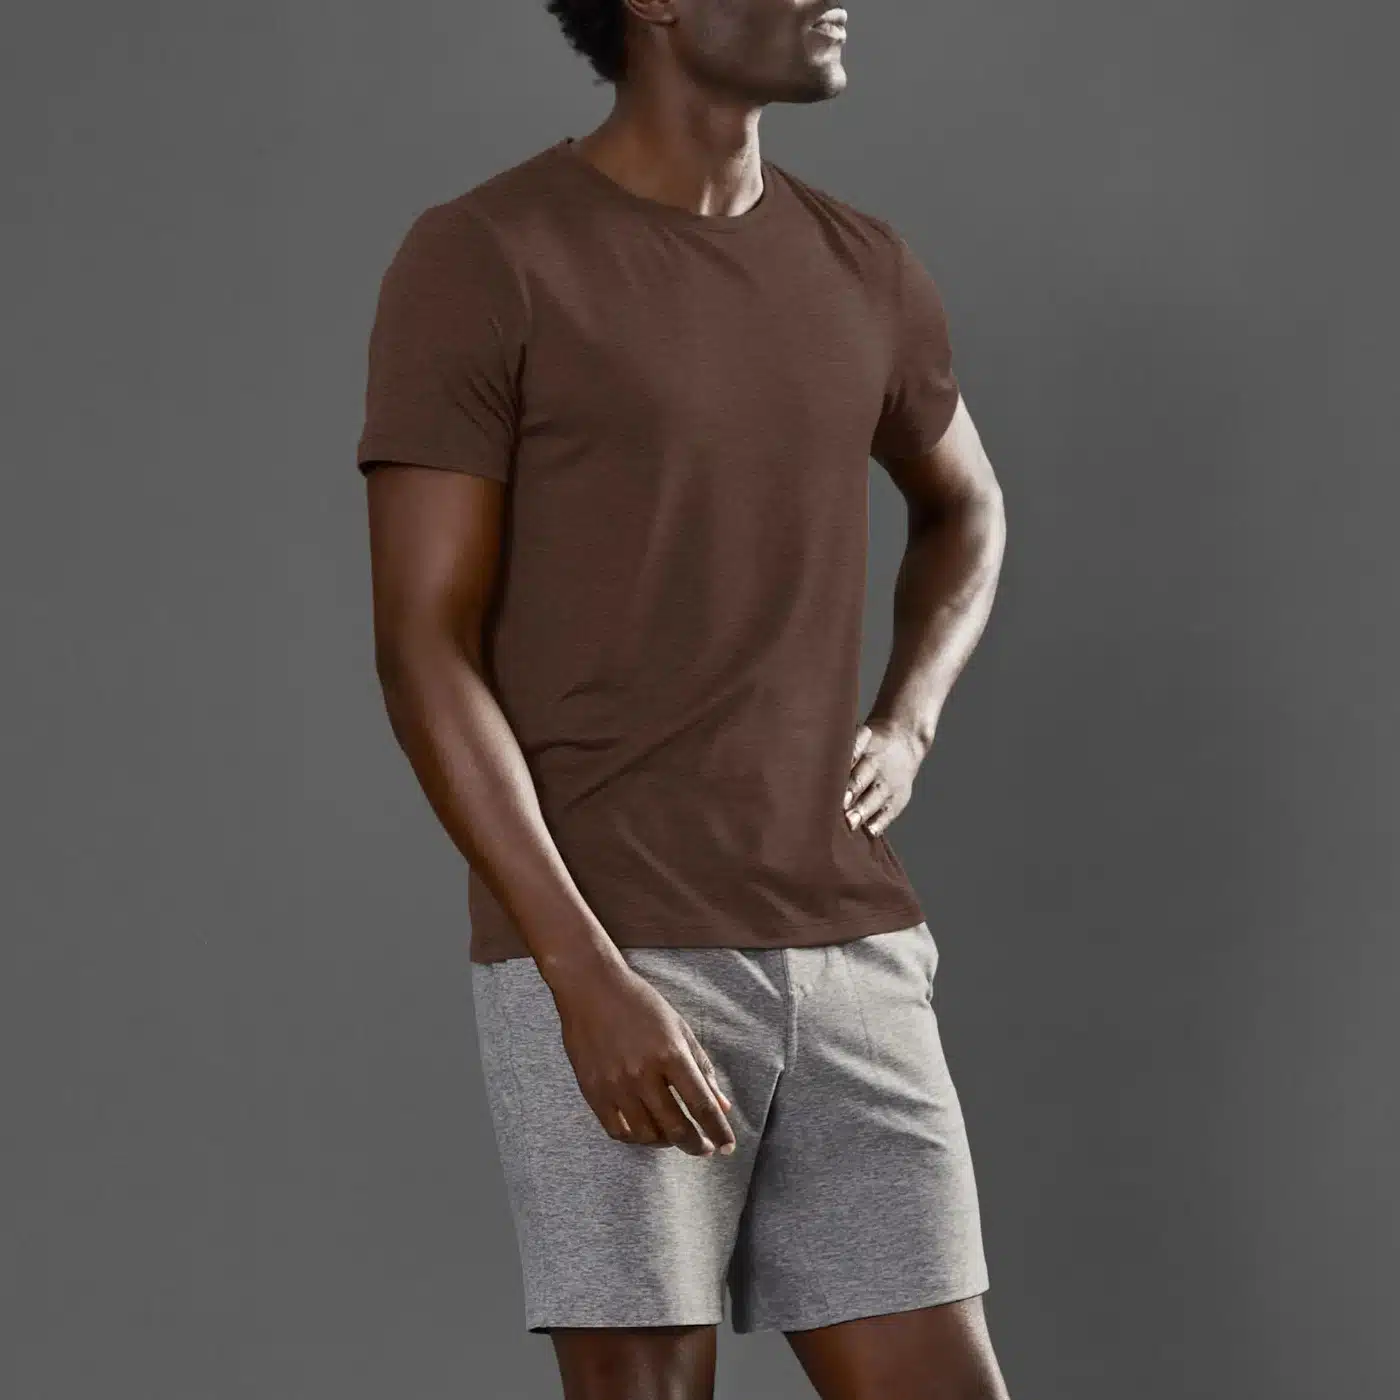 Best Yoga Clothes for Men: 4 Brands for Flexing in Style - The Modest Man